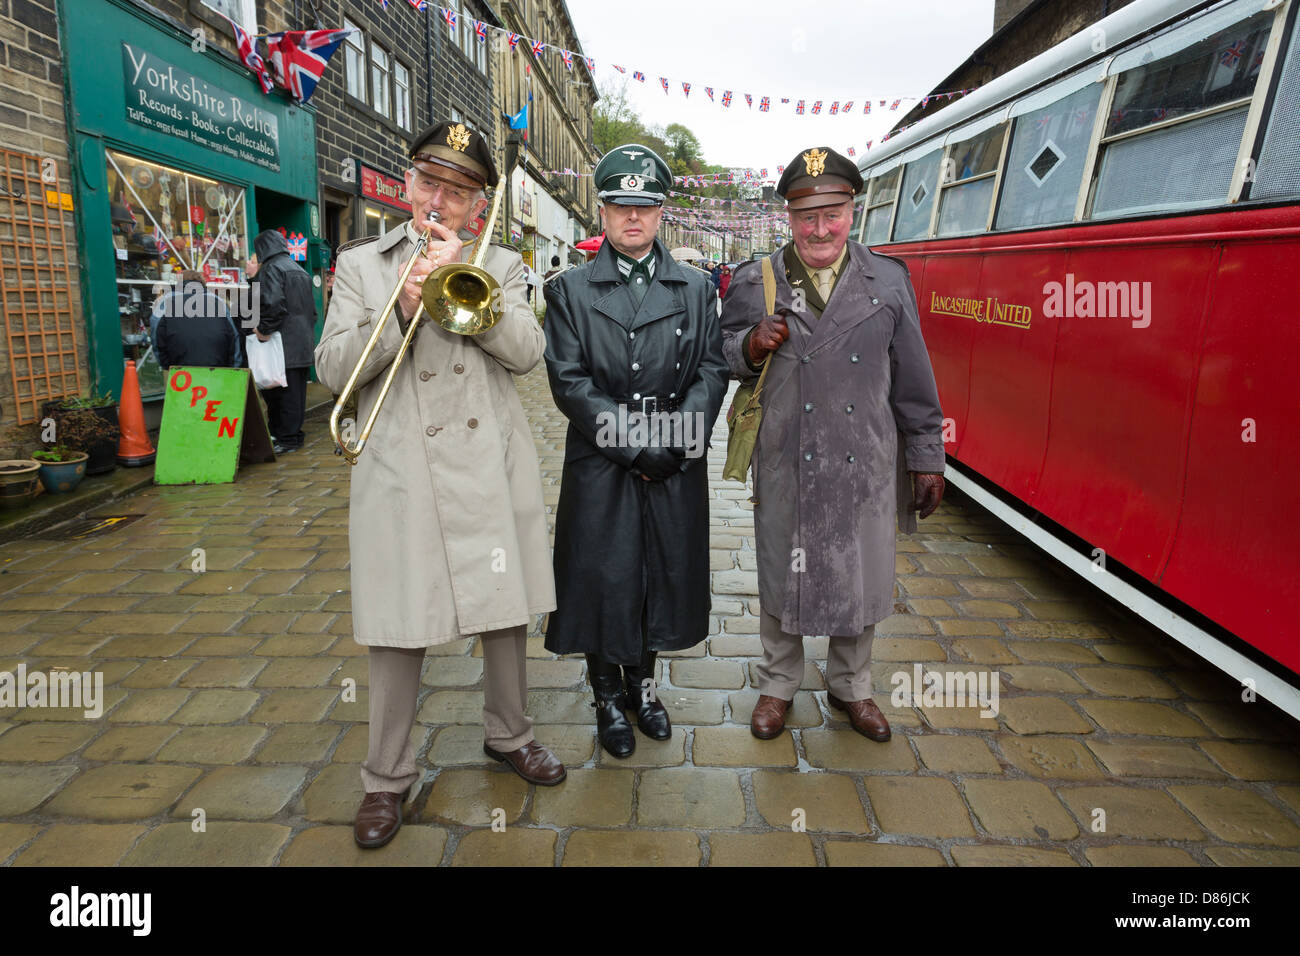 Two men in American Army uniforms, one playing a trombone, with a man in Germany Army uniform. Haworth 1940s weekend, May 2013. Stock Photo